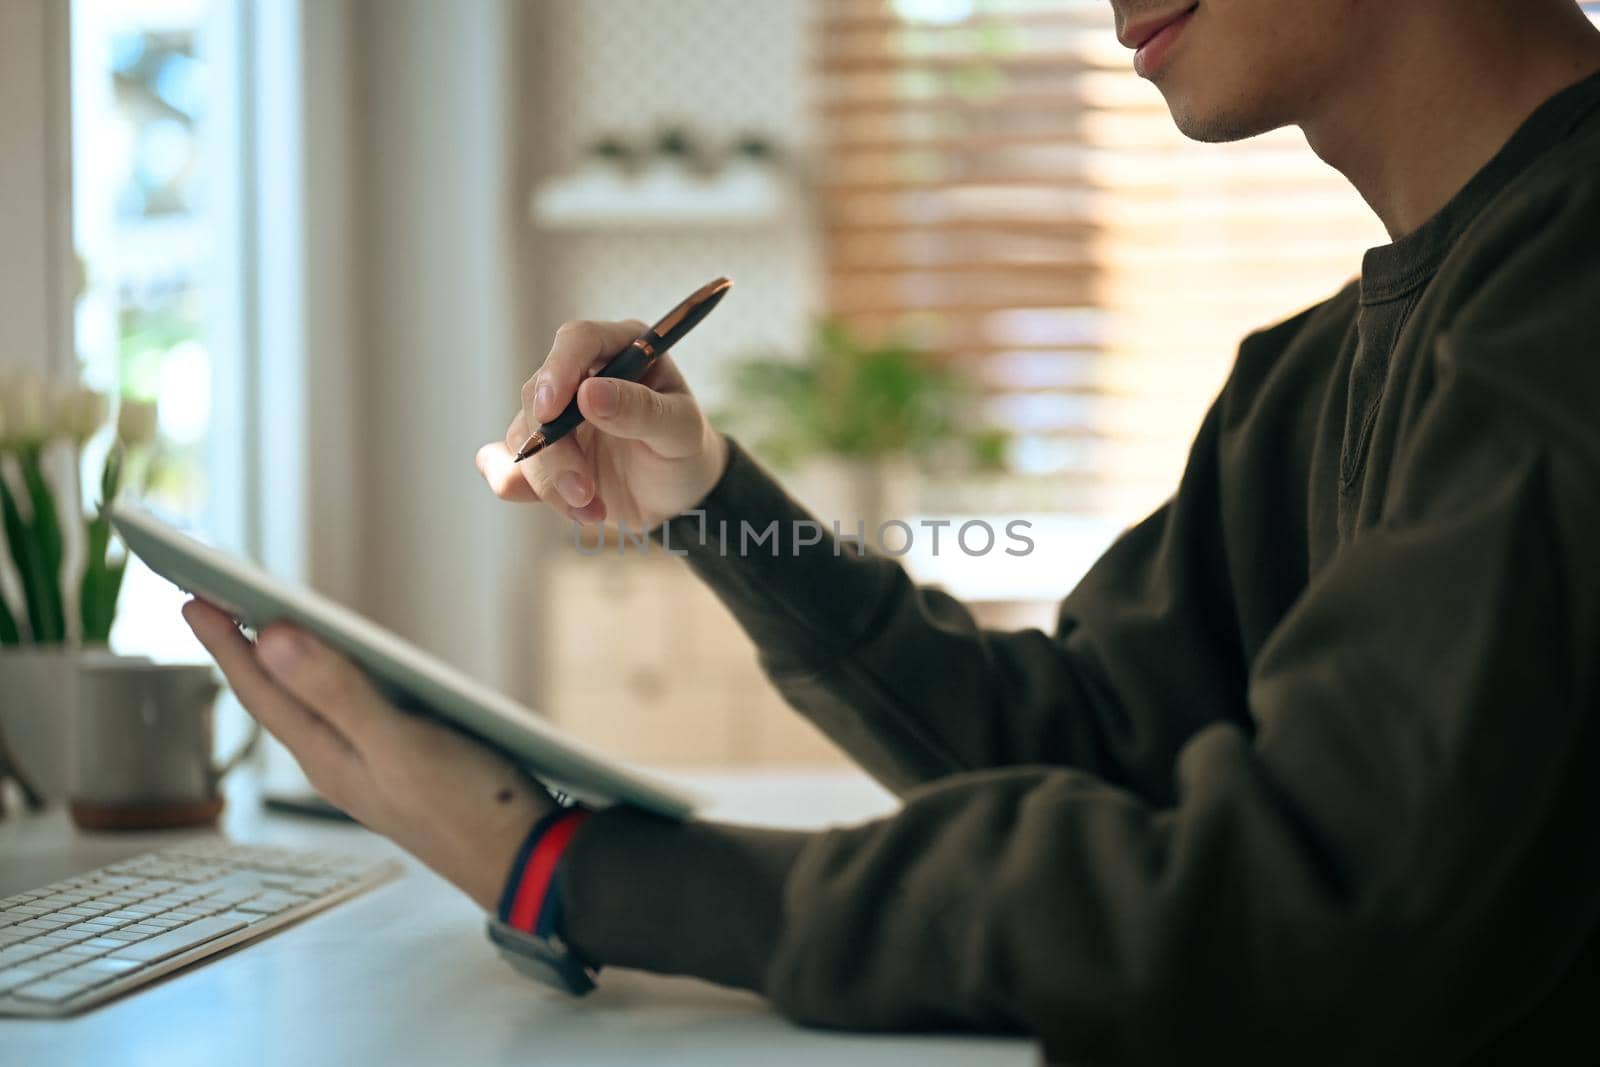 Man freelancer holding pen and using digital tablet while working online from home.